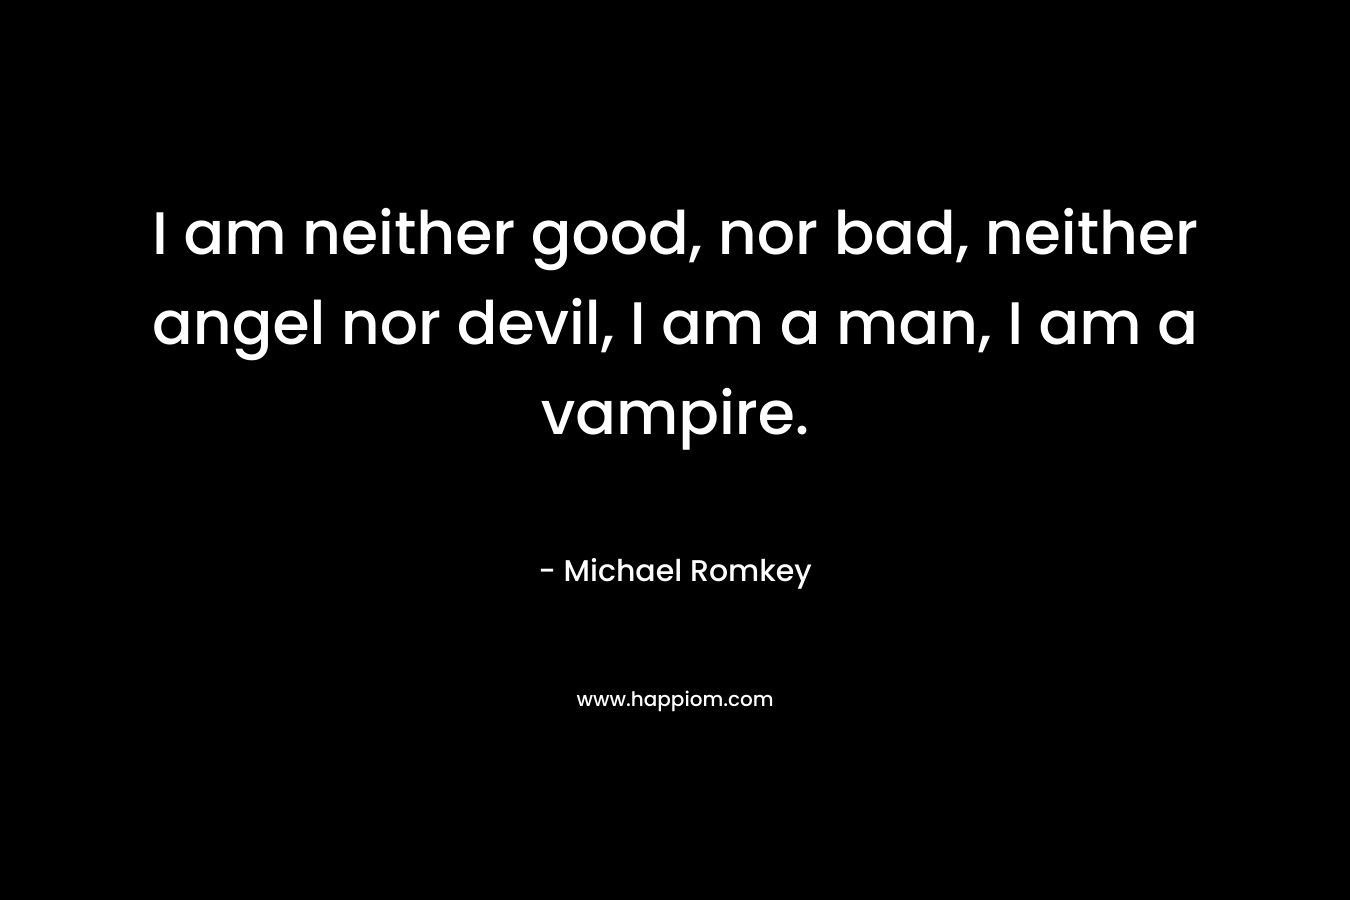 I am neither good, nor bad, neither angel nor devil, I am a man, I am a vampire.